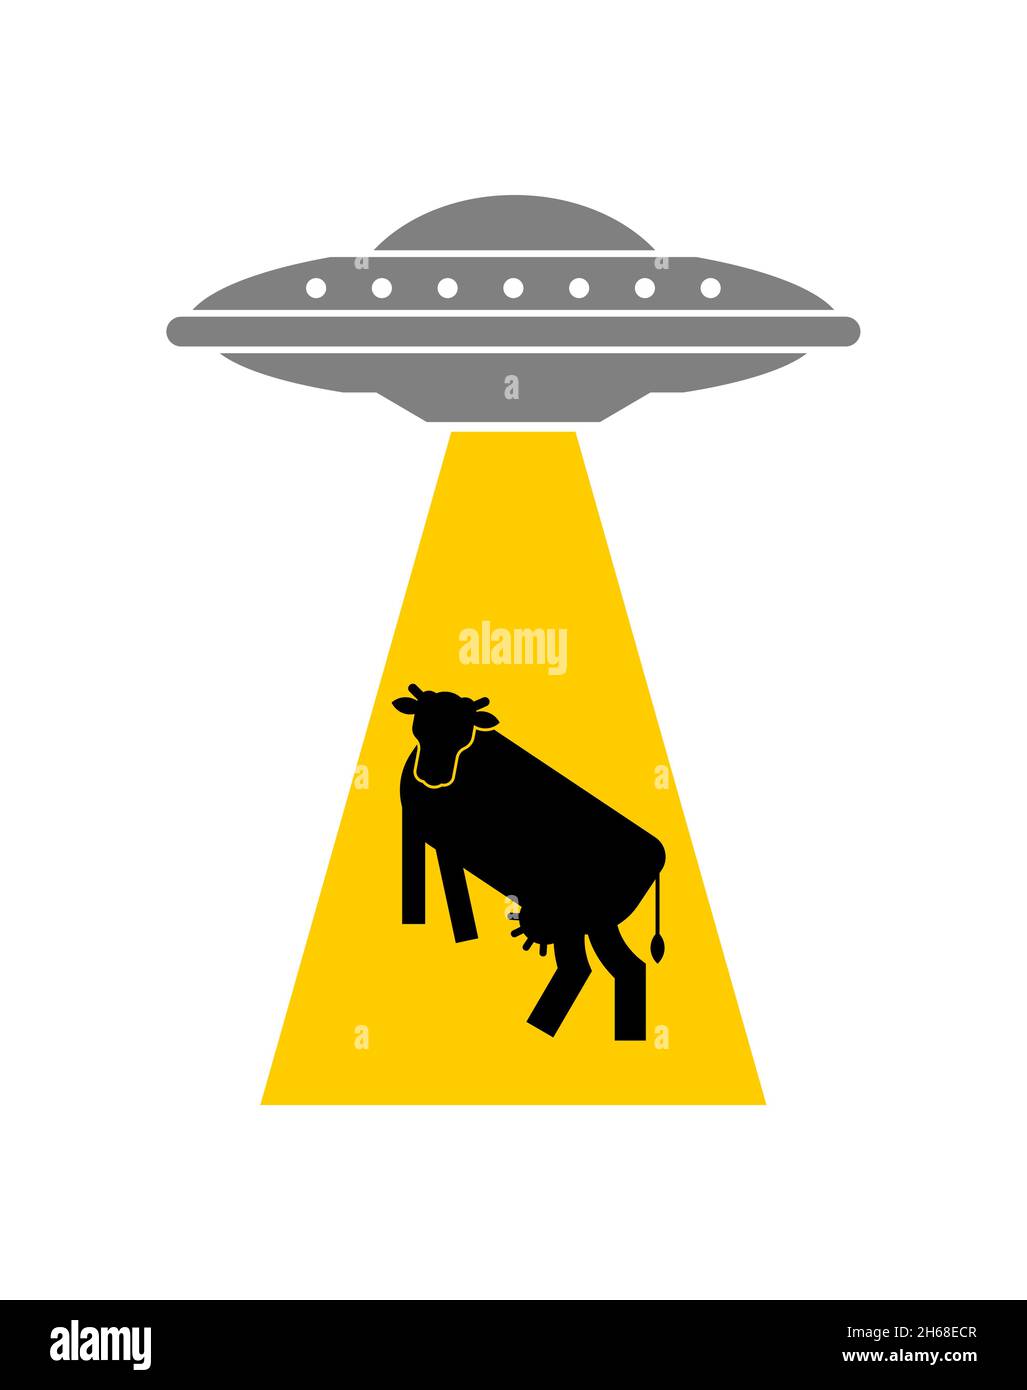 Ufo steals cow pixel art. pixelated Alien flying saucer and cows 8 bit.  Concept of extraterrestrial civilizations and Experiments on another planet  Stock Vector